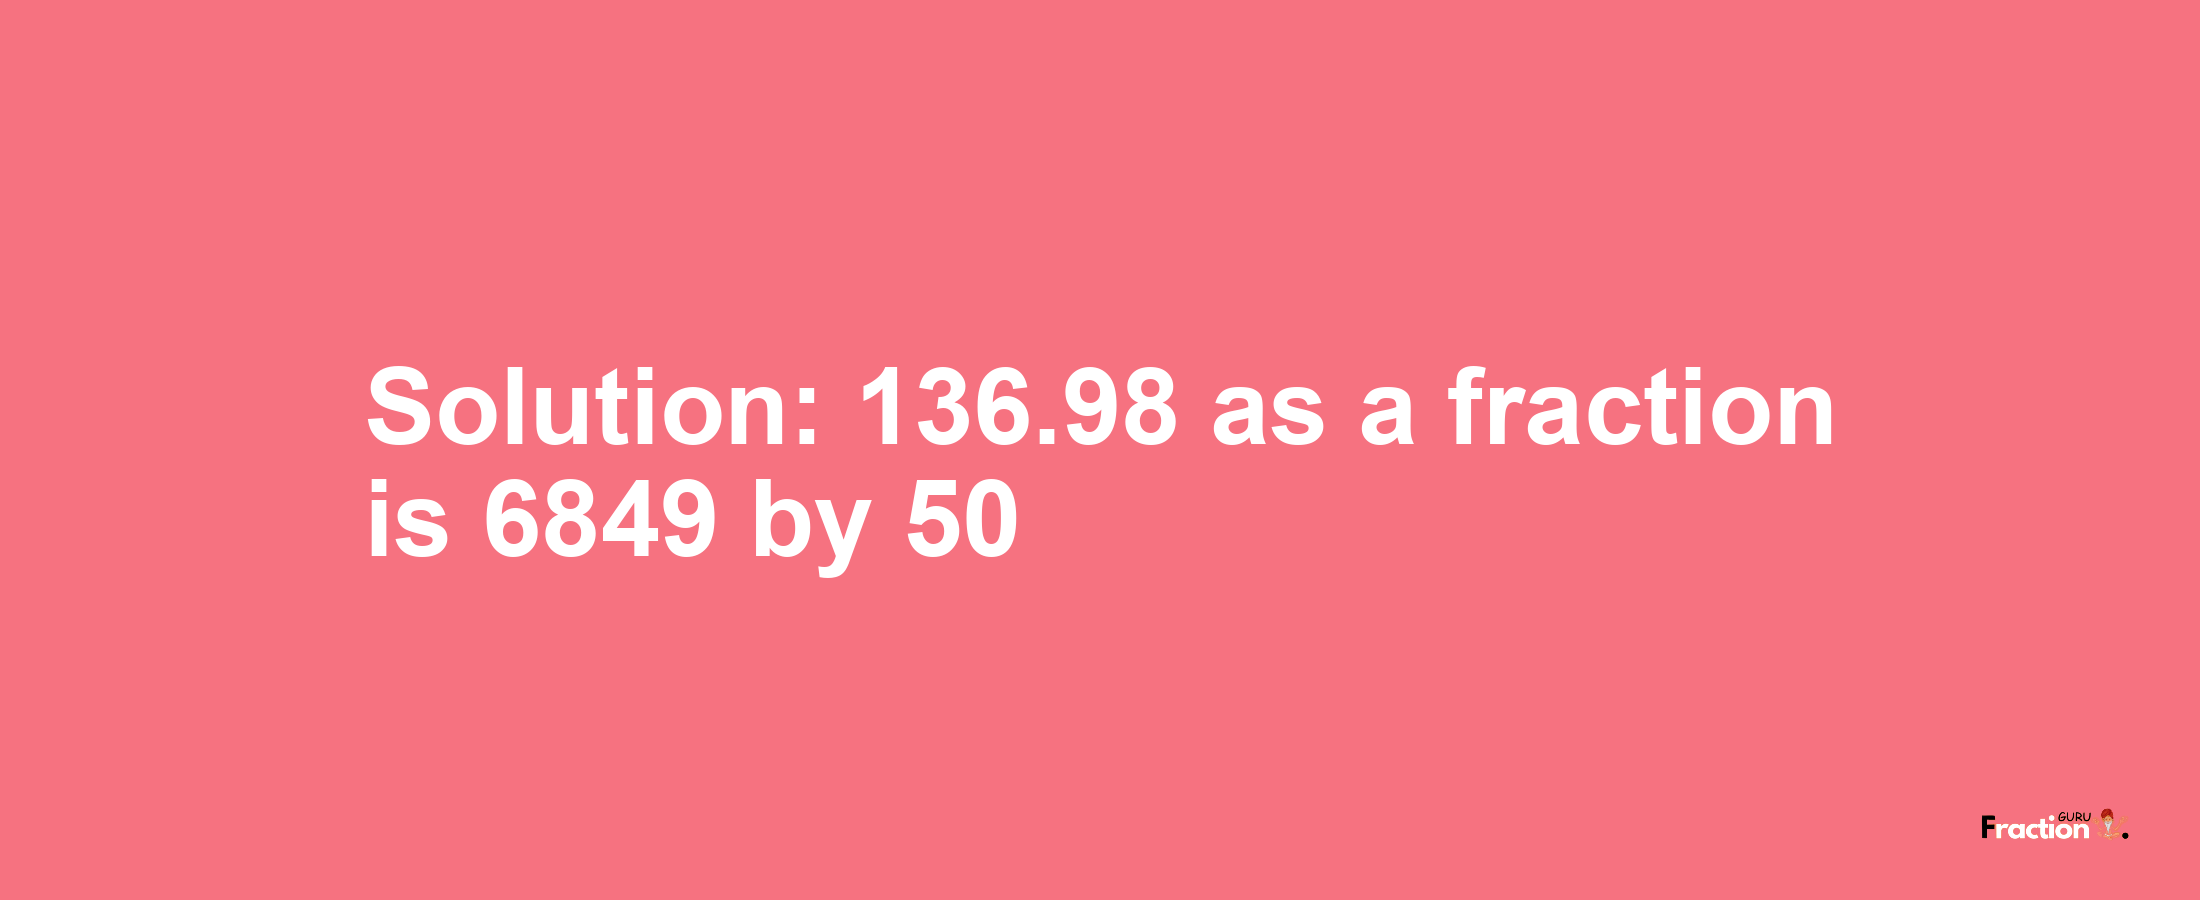 Solution:136.98 as a fraction is 6849/50